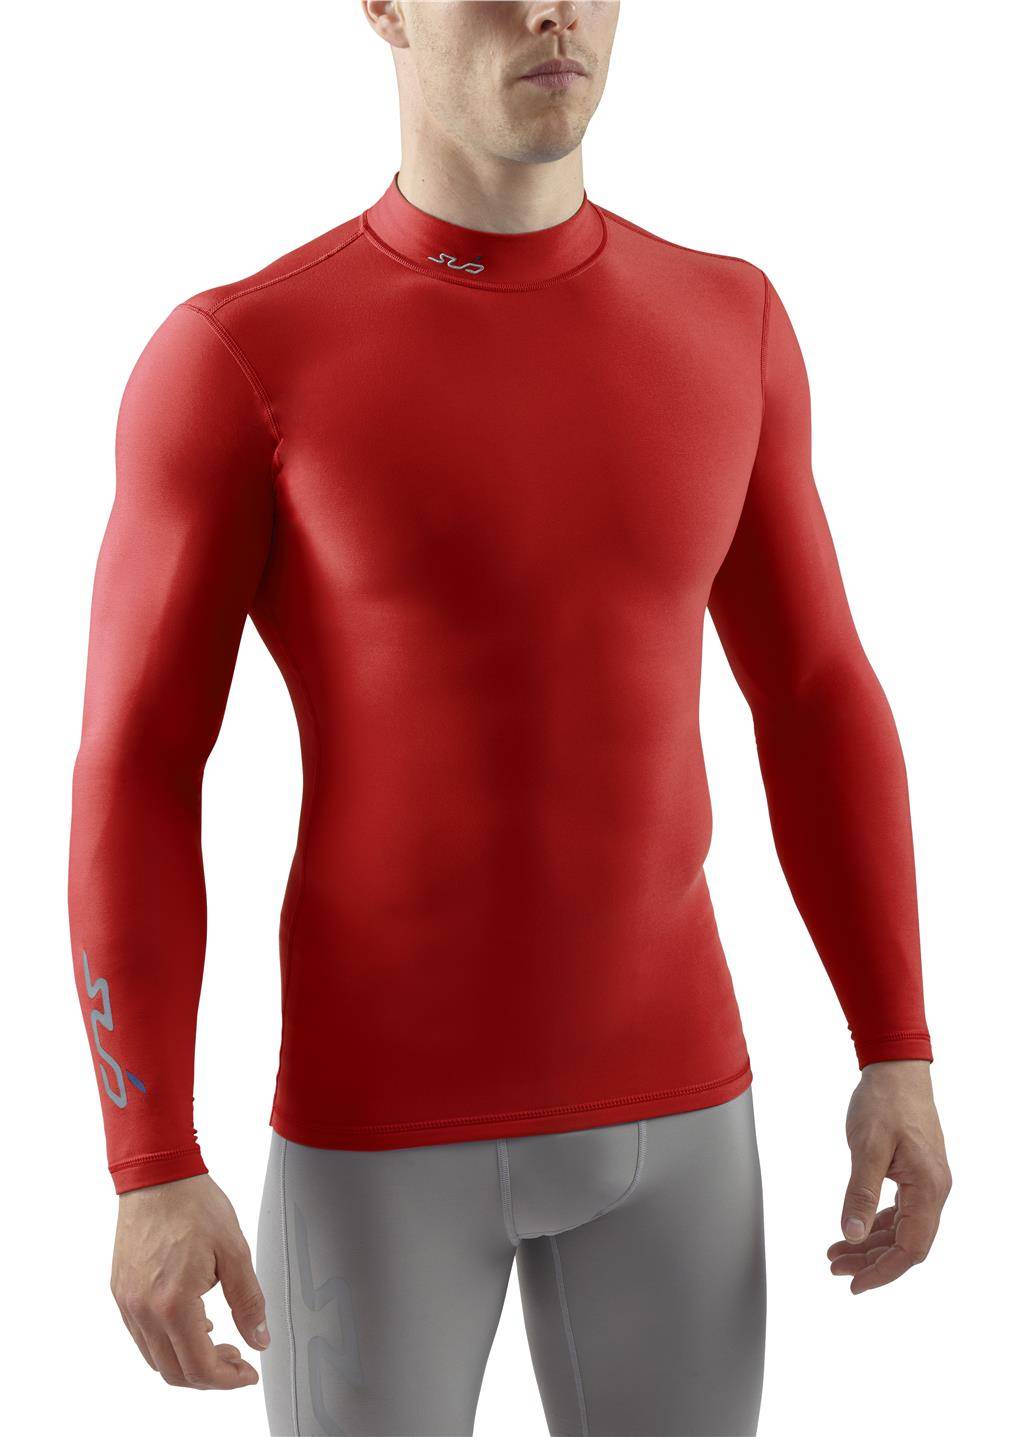 RBX Performance Baselayer Termal Top large. Men's Tactical Military Base layer Thermal Compression shorts.